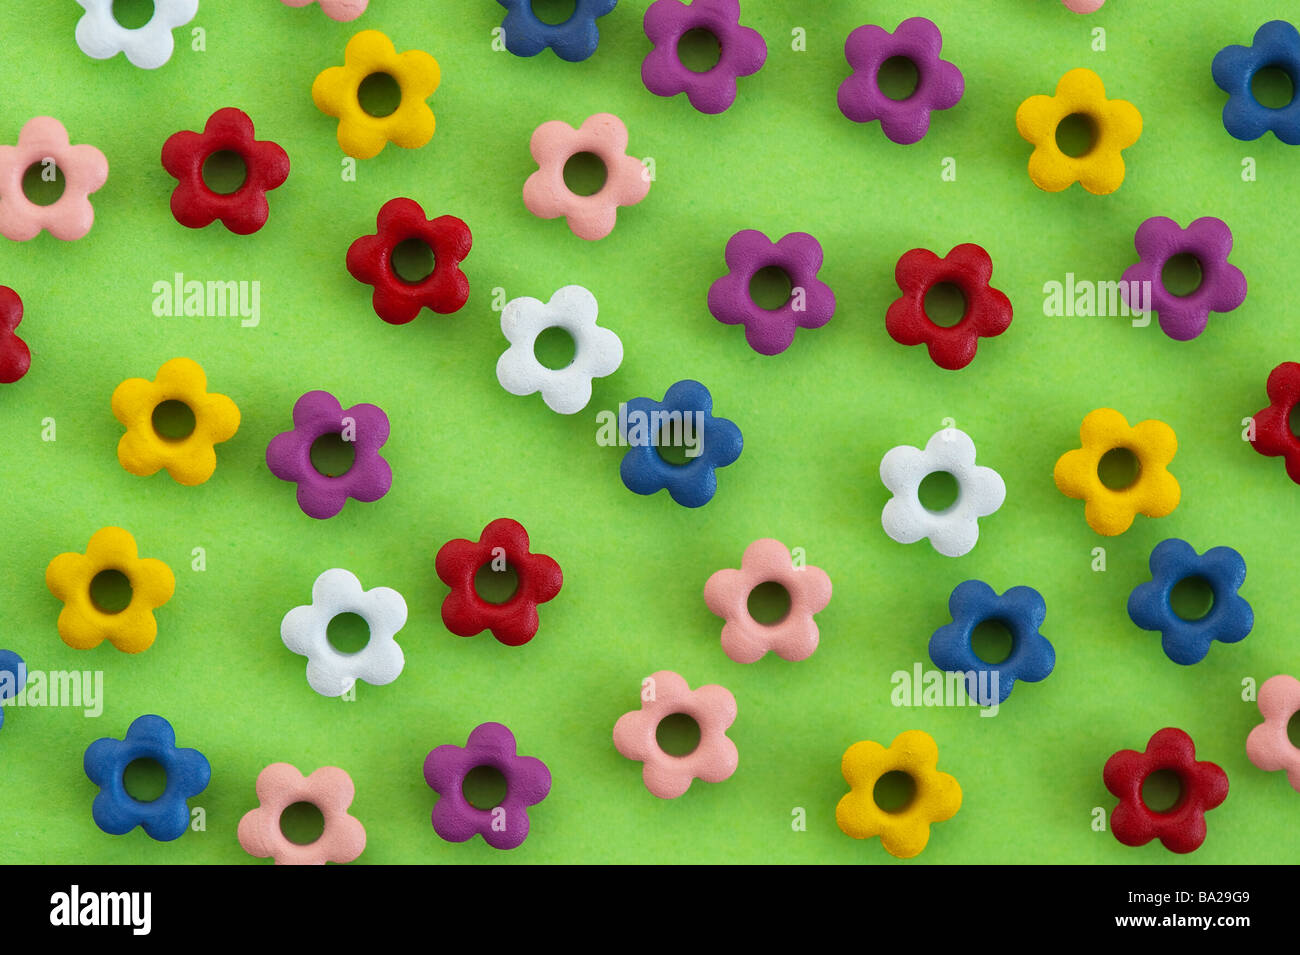 Multicoloured craft flower shapes on green background Stock Photo